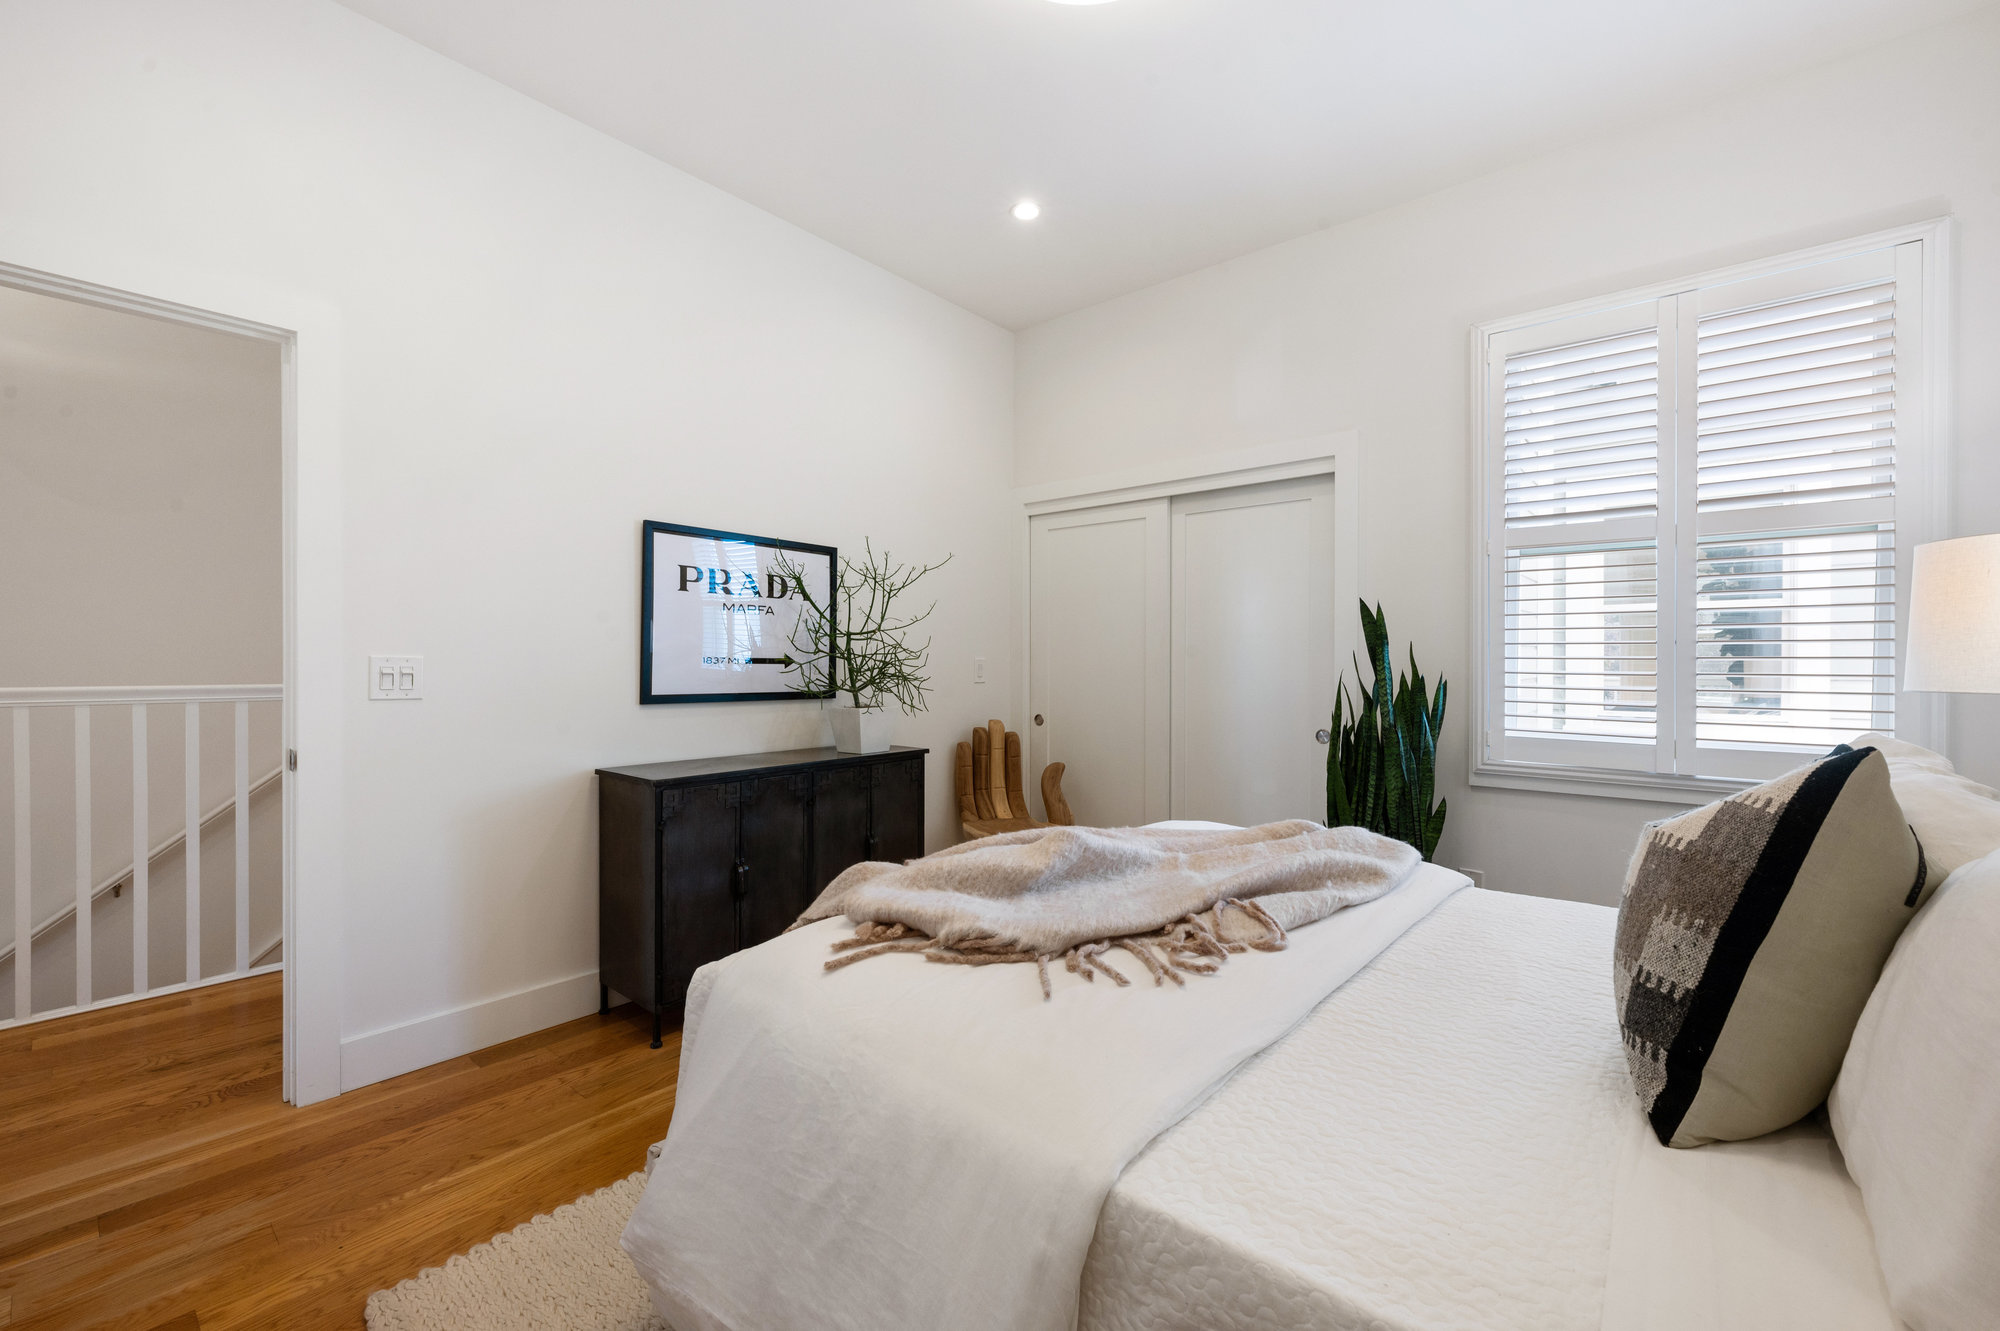 Property Photo: Bedroom two, showing wood floors and recess lighting